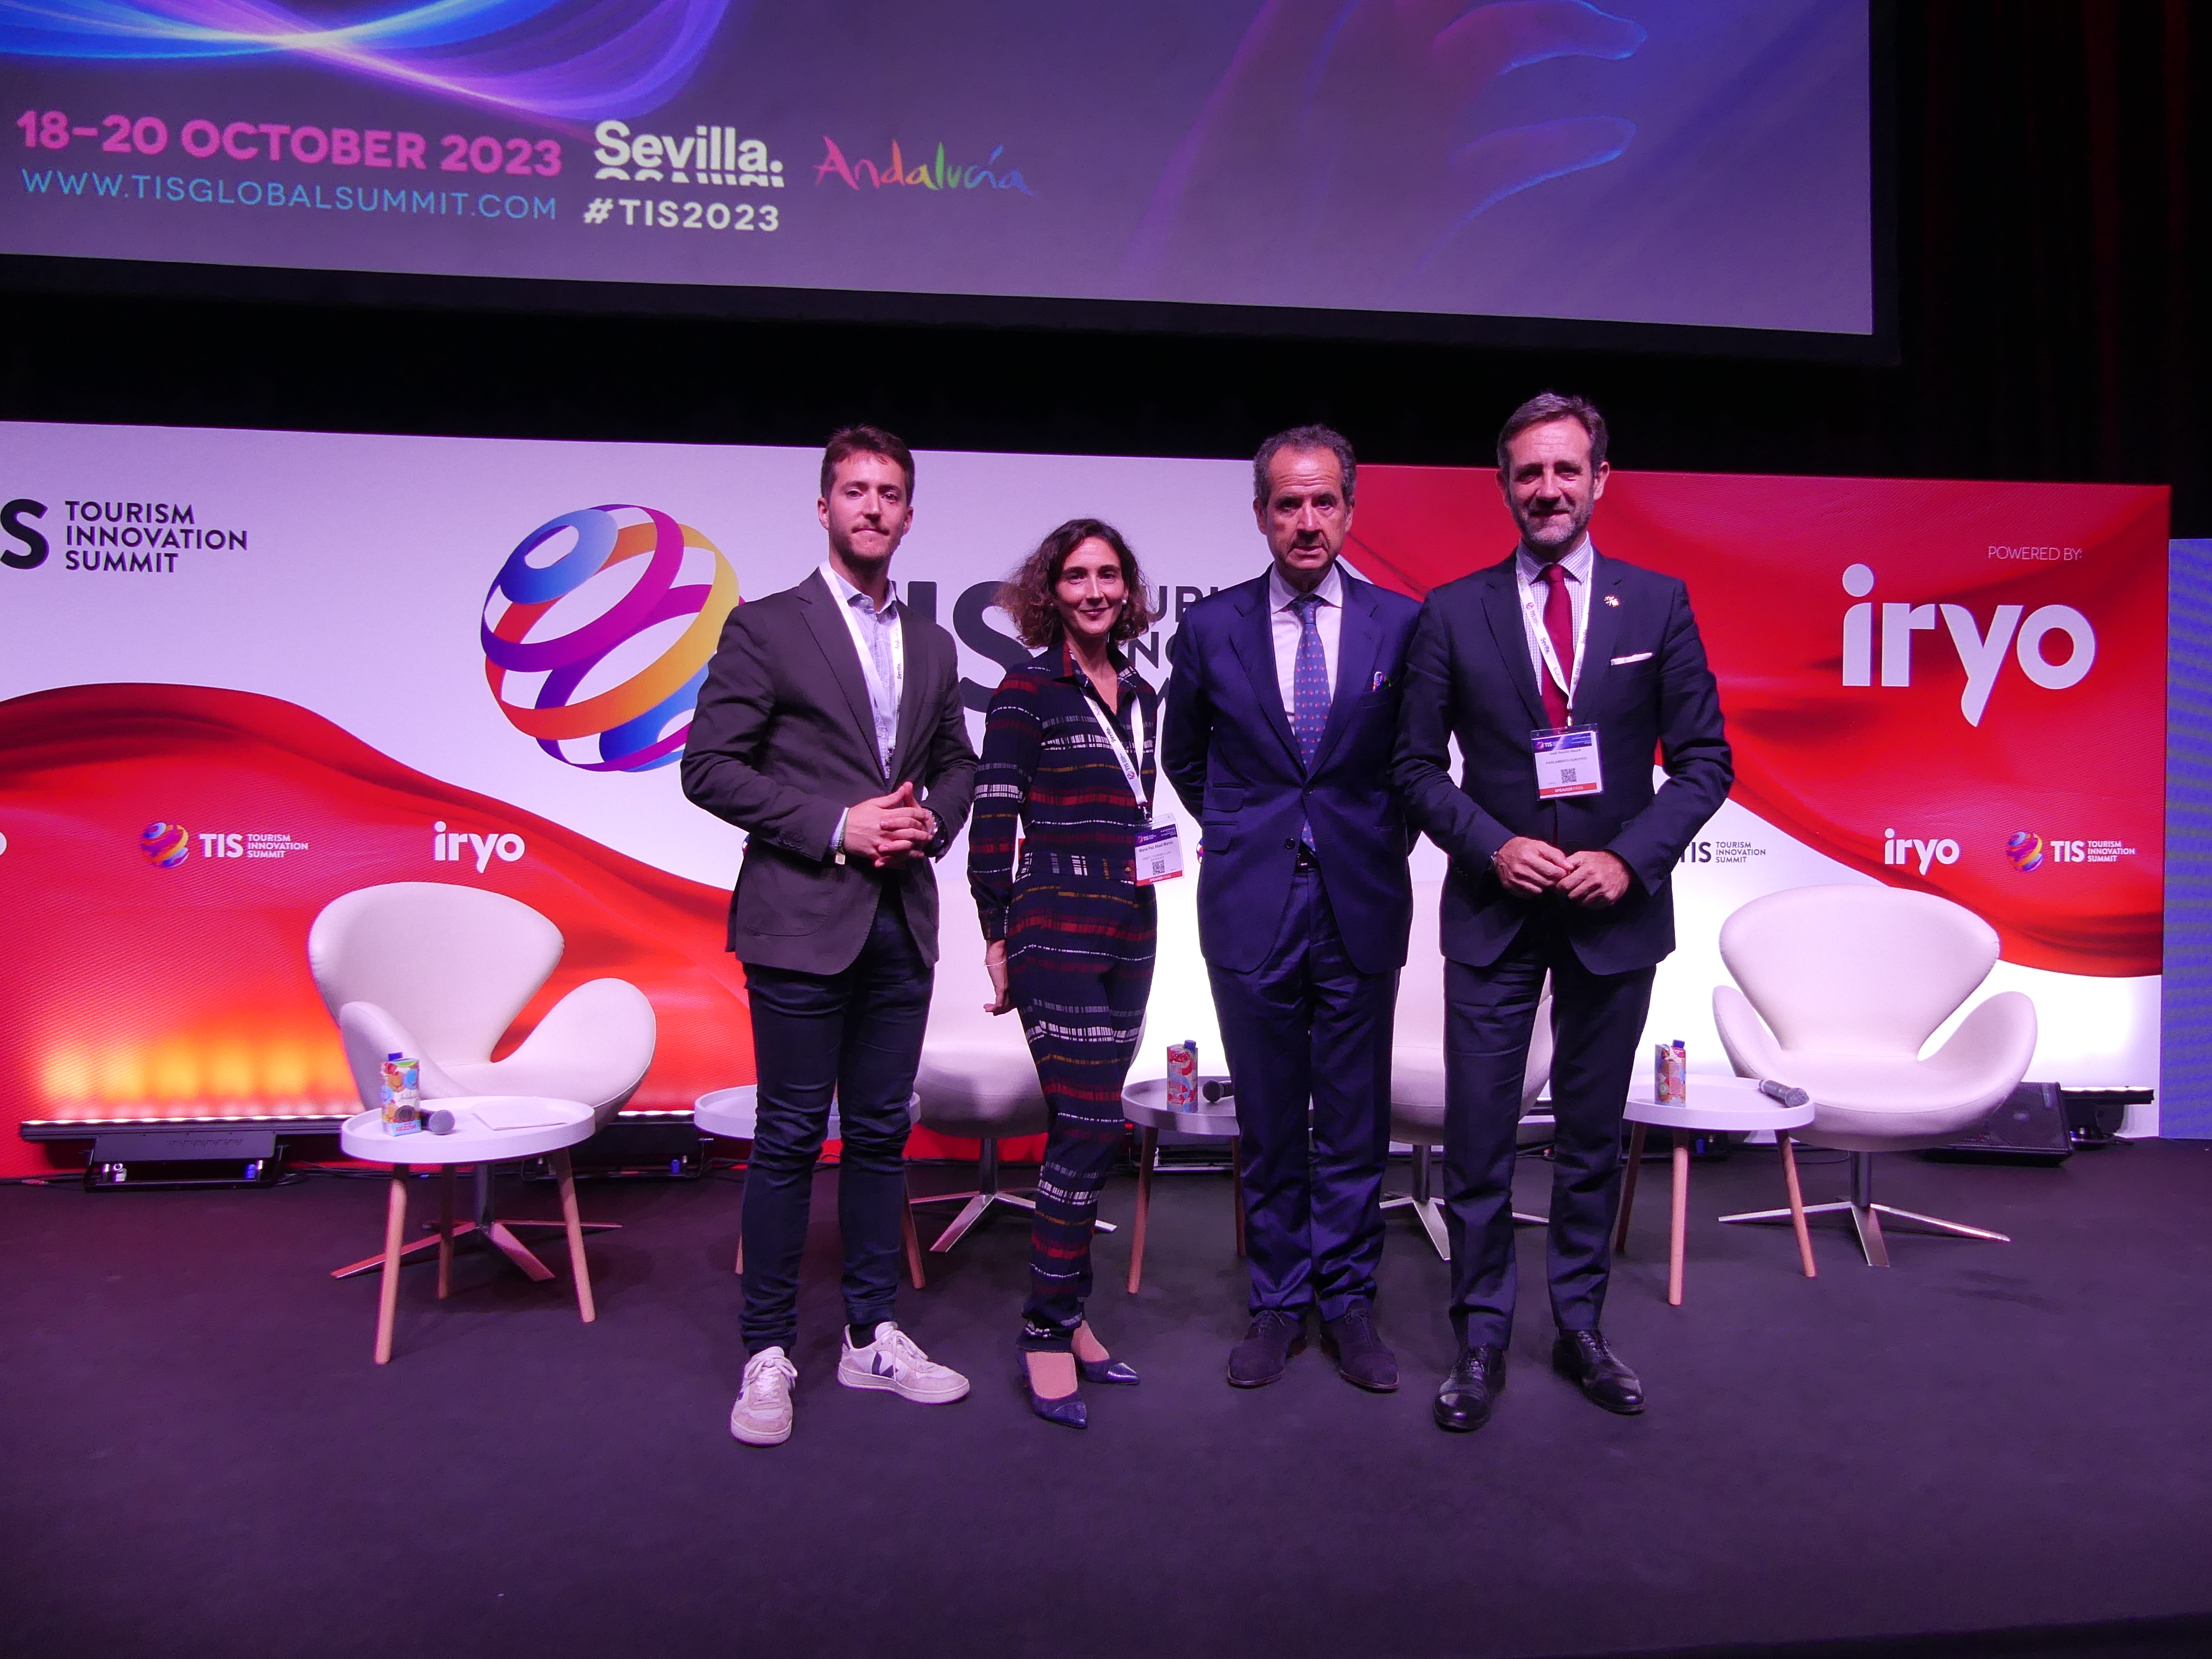 GOVERSYS participated in the Tourism Innovation Summit (TIS) 2023 with an unprecedented panel on government and institutional travel